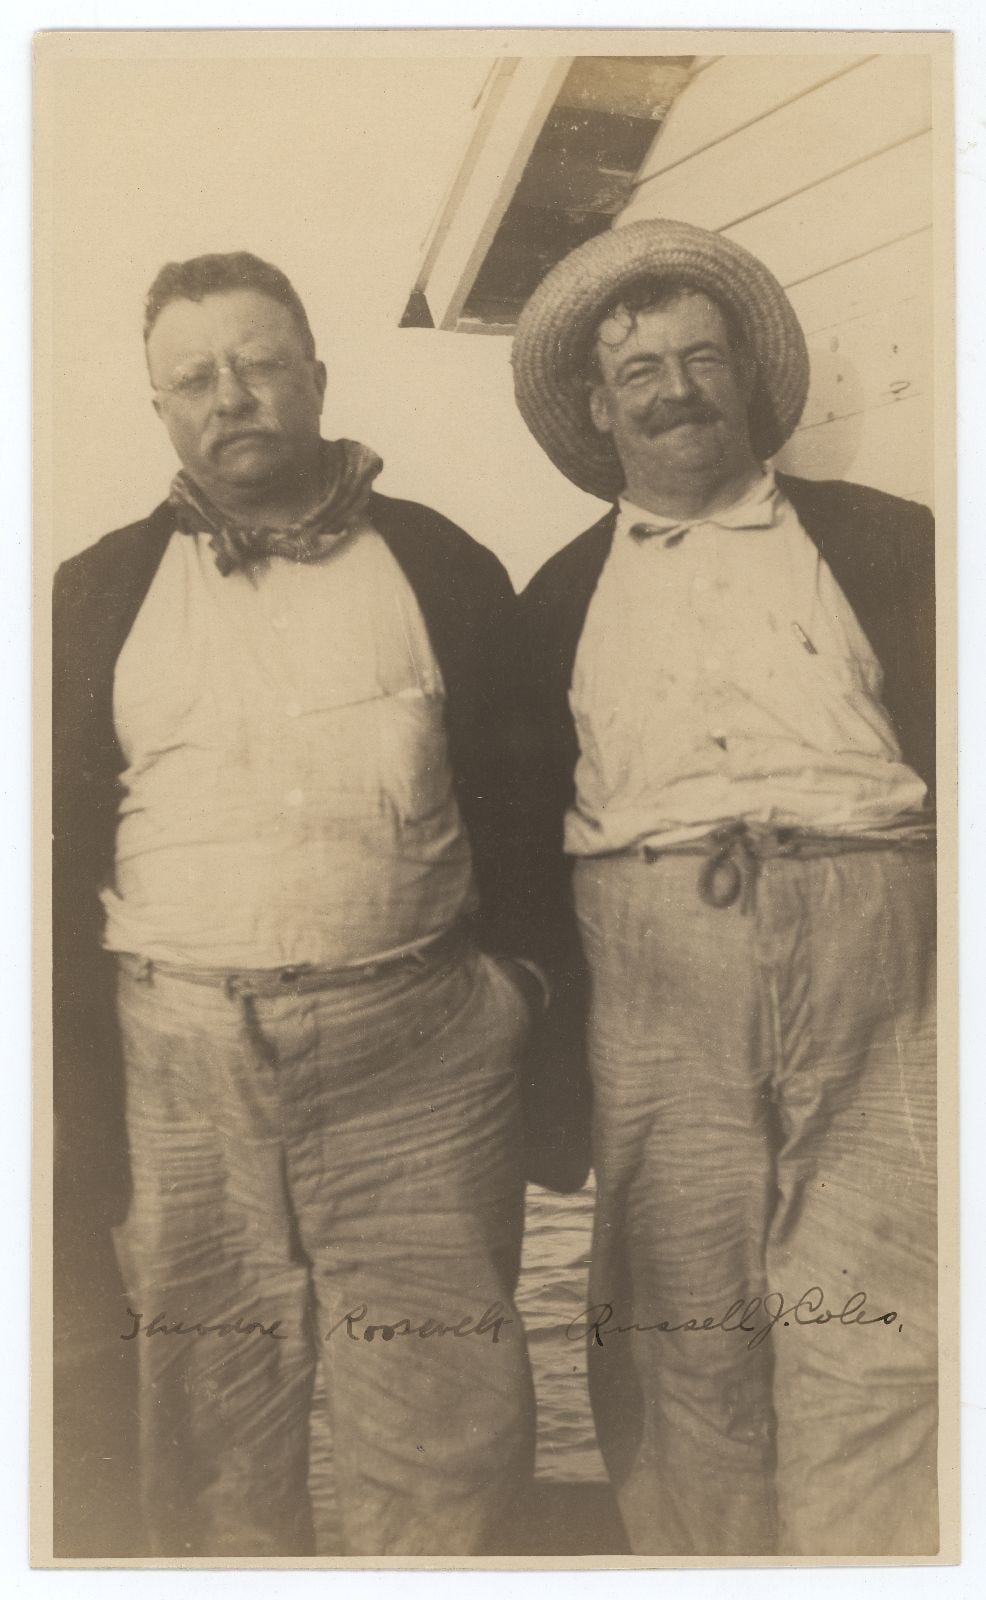 A picture of Theodore Roosevelt and Russell J. Coles